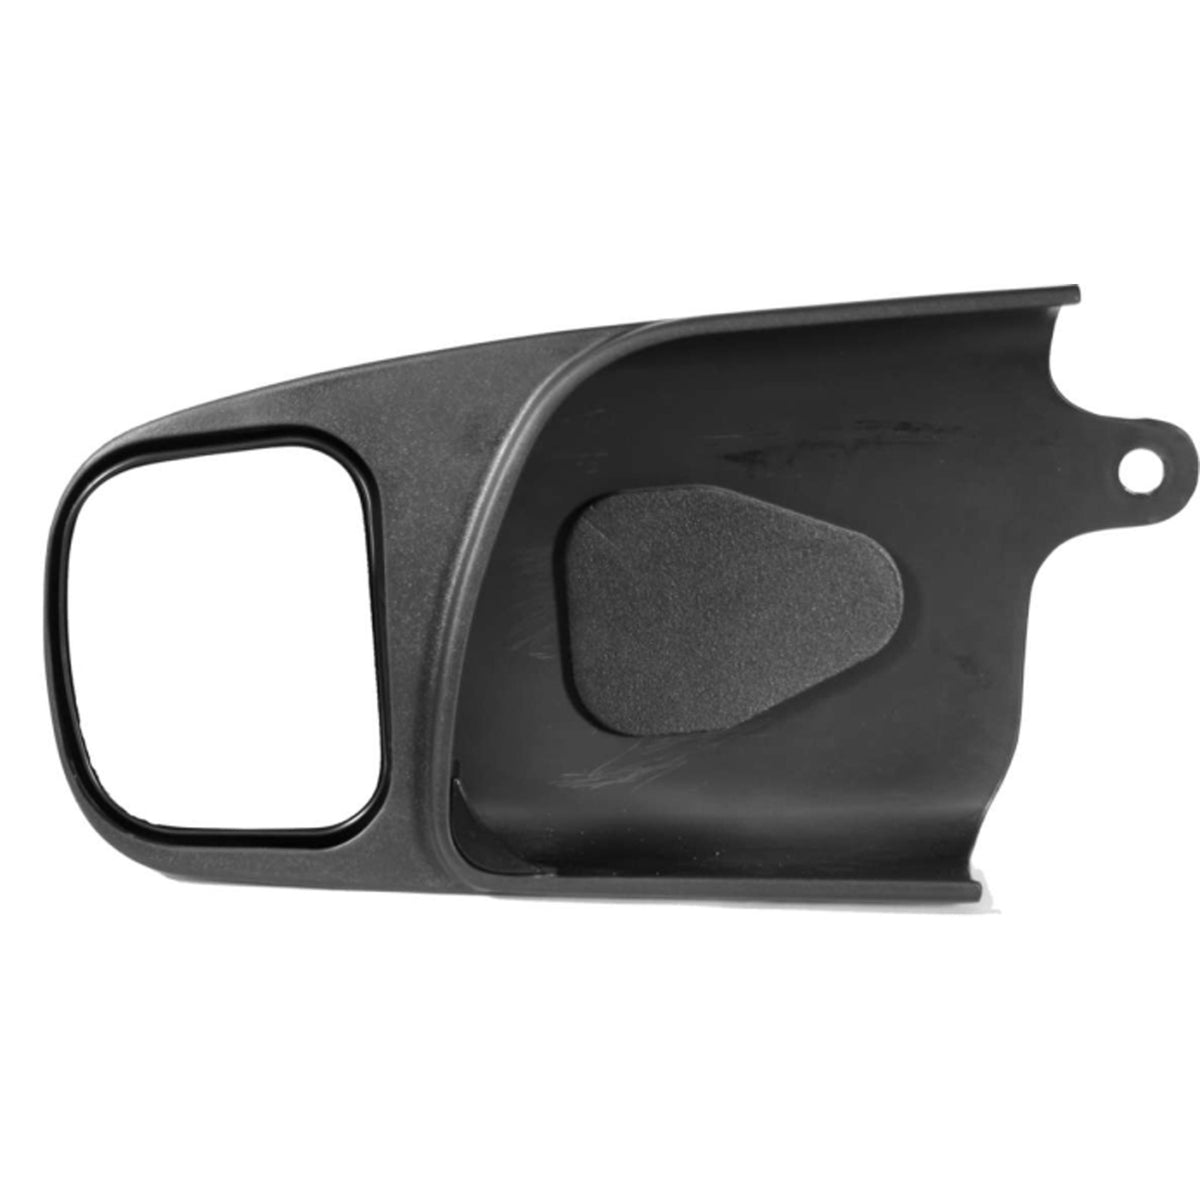 LongView Towing Mirror LVT-2600 The Original Slip On Tow Mirror For Ford 99 - 05